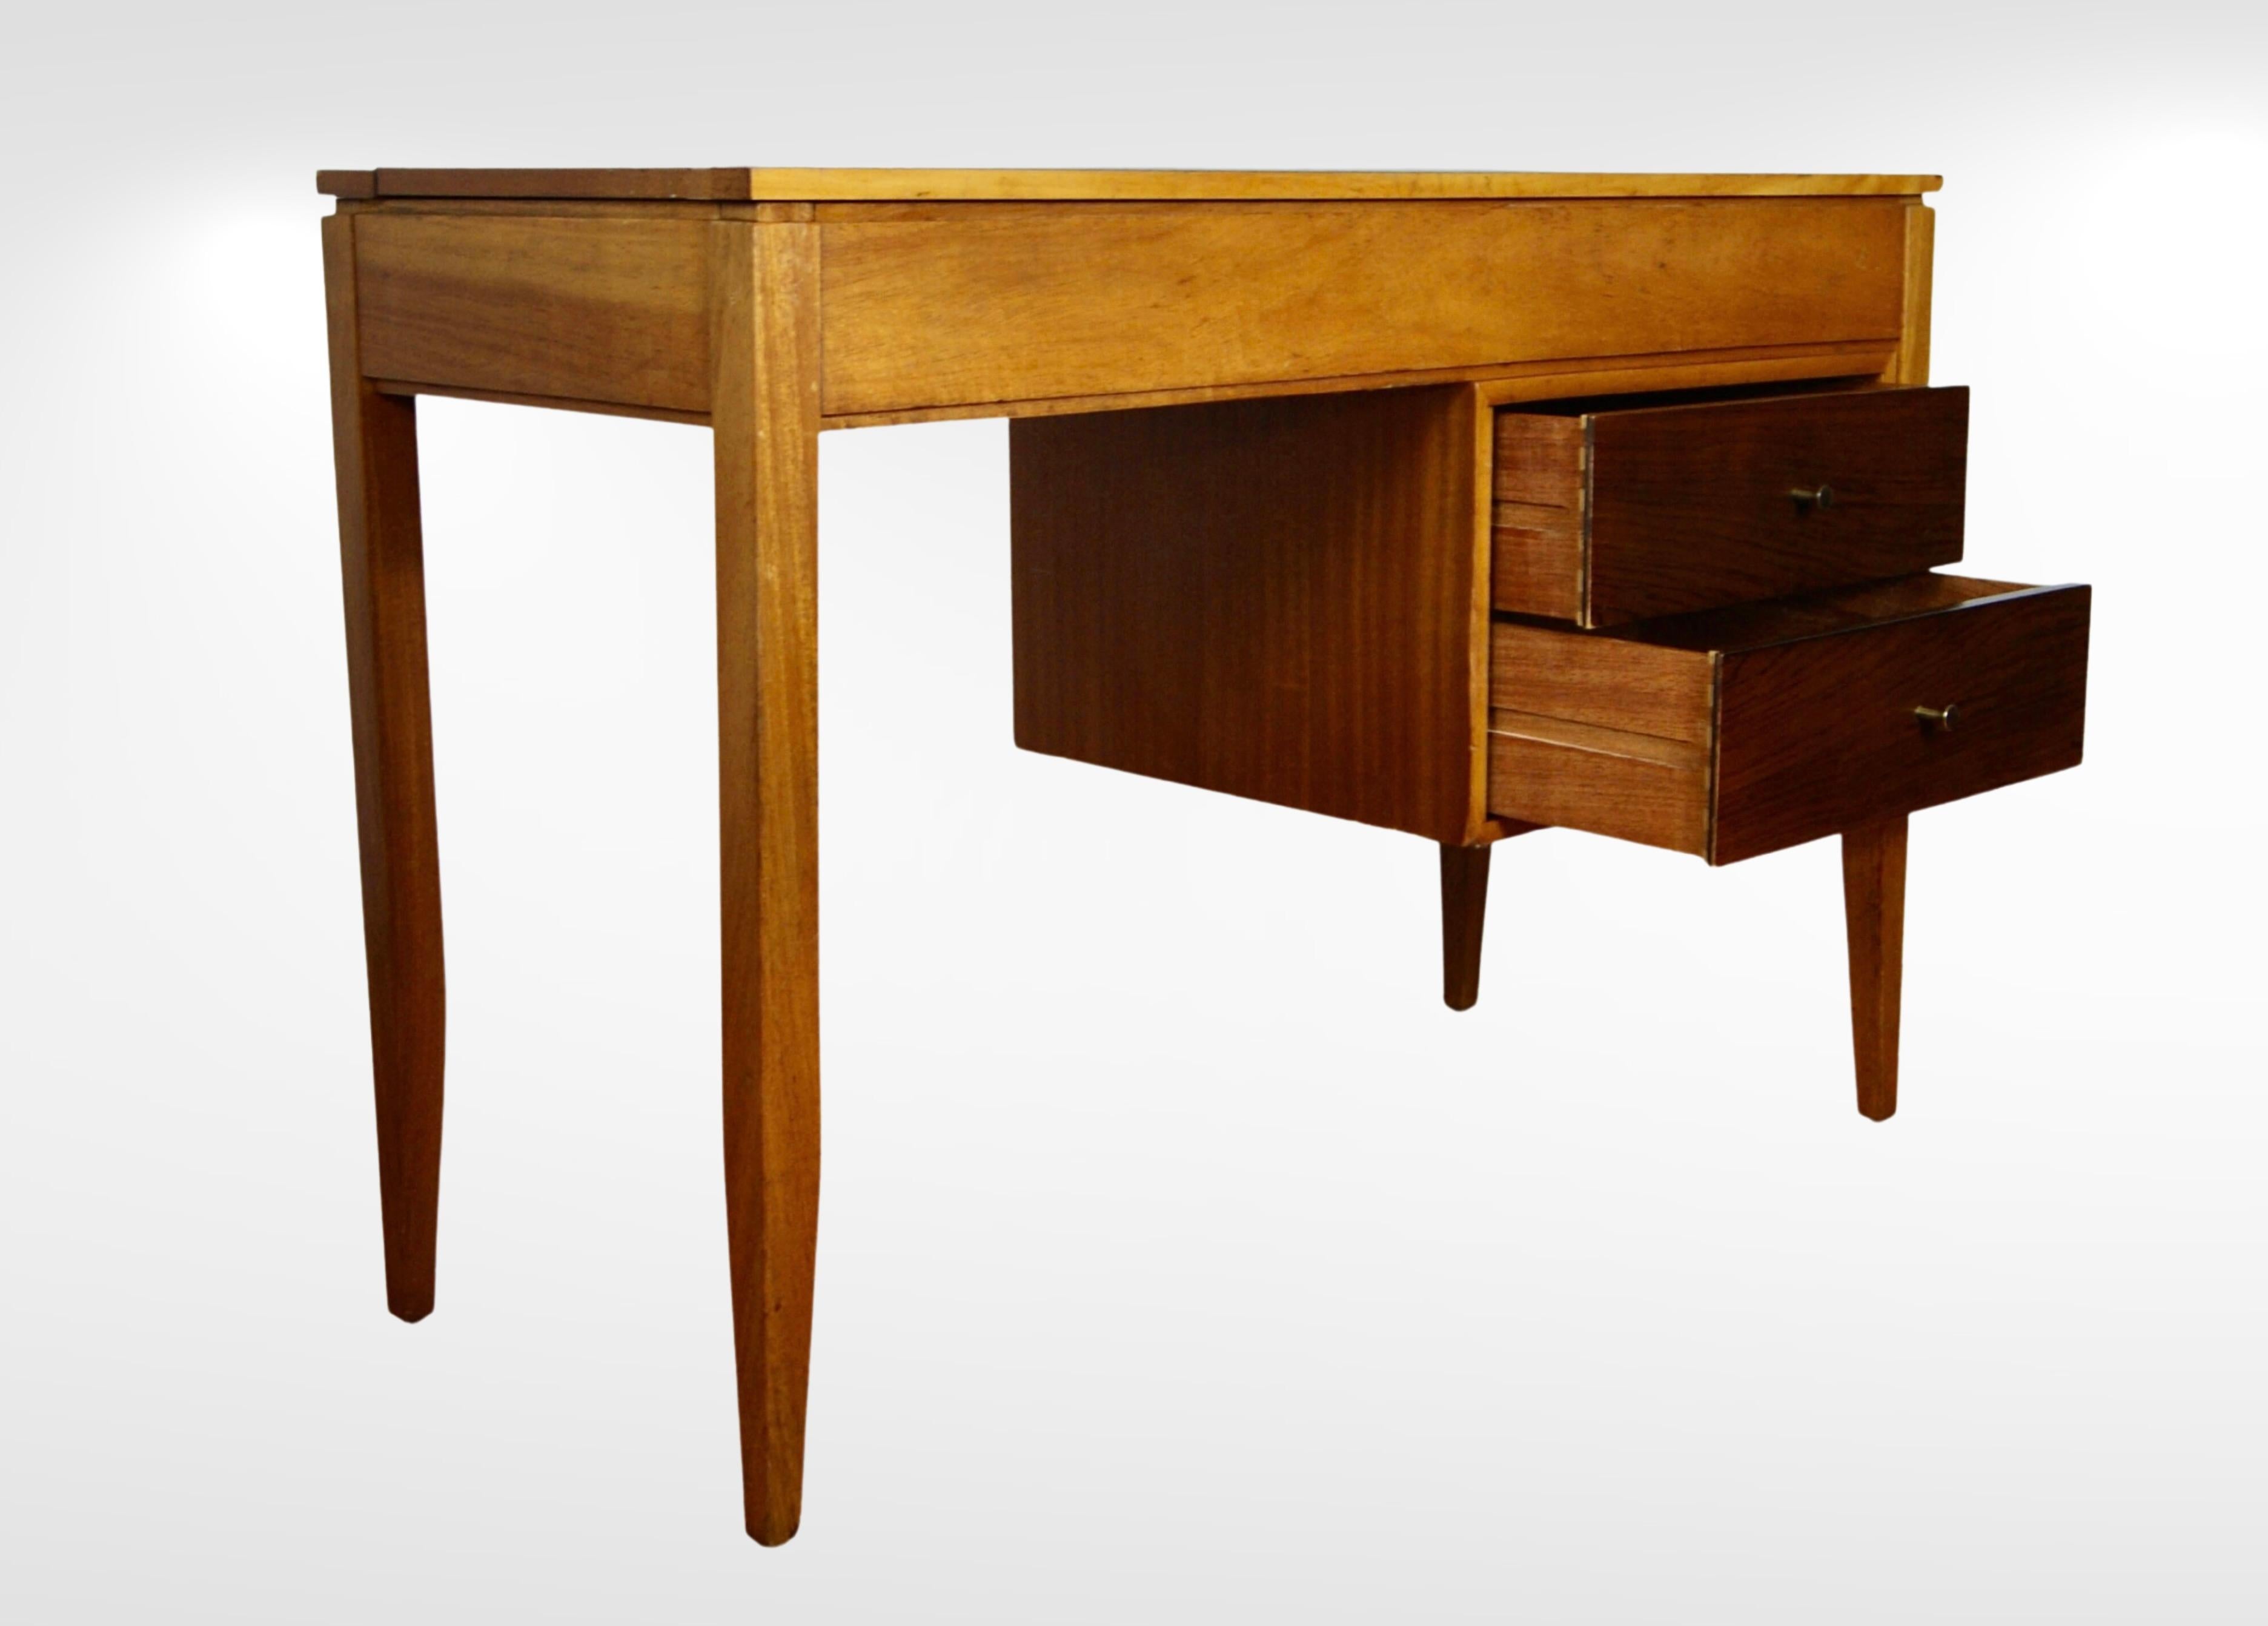 Retro Leather Top Desk/Dresser with Mirrored Interior Peter Hayward for UNIFLEX For Sale 2